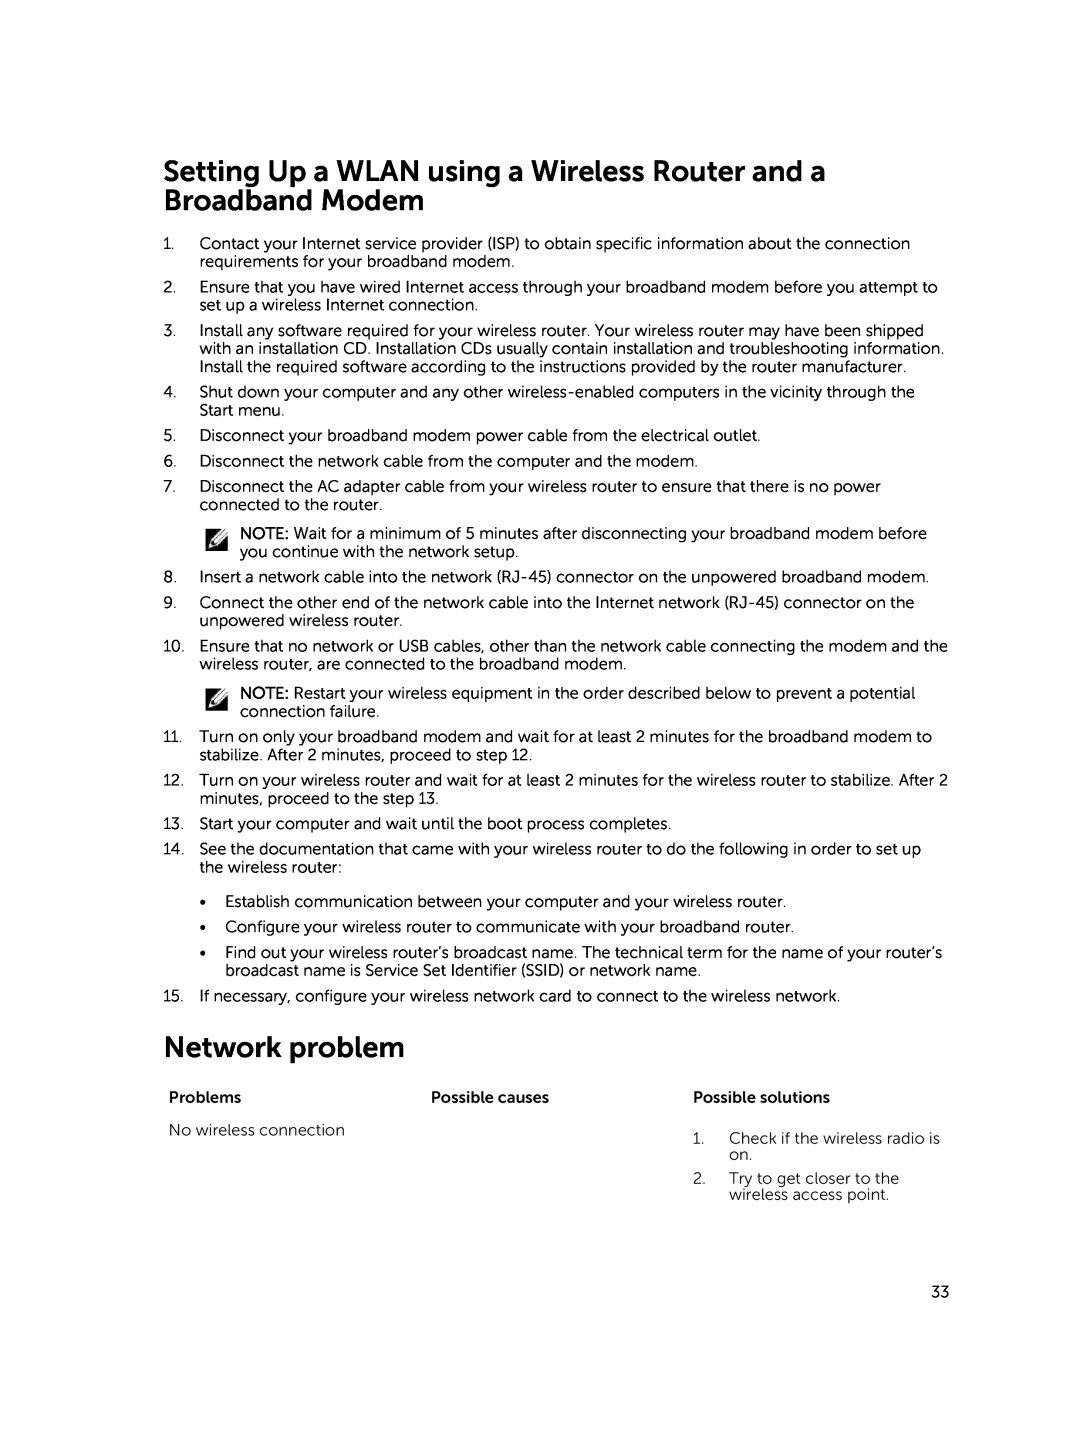 Dell 13-7350 manual Setting Up a WLAN using a Wireless Router and a Broadband Modem, Network problem 